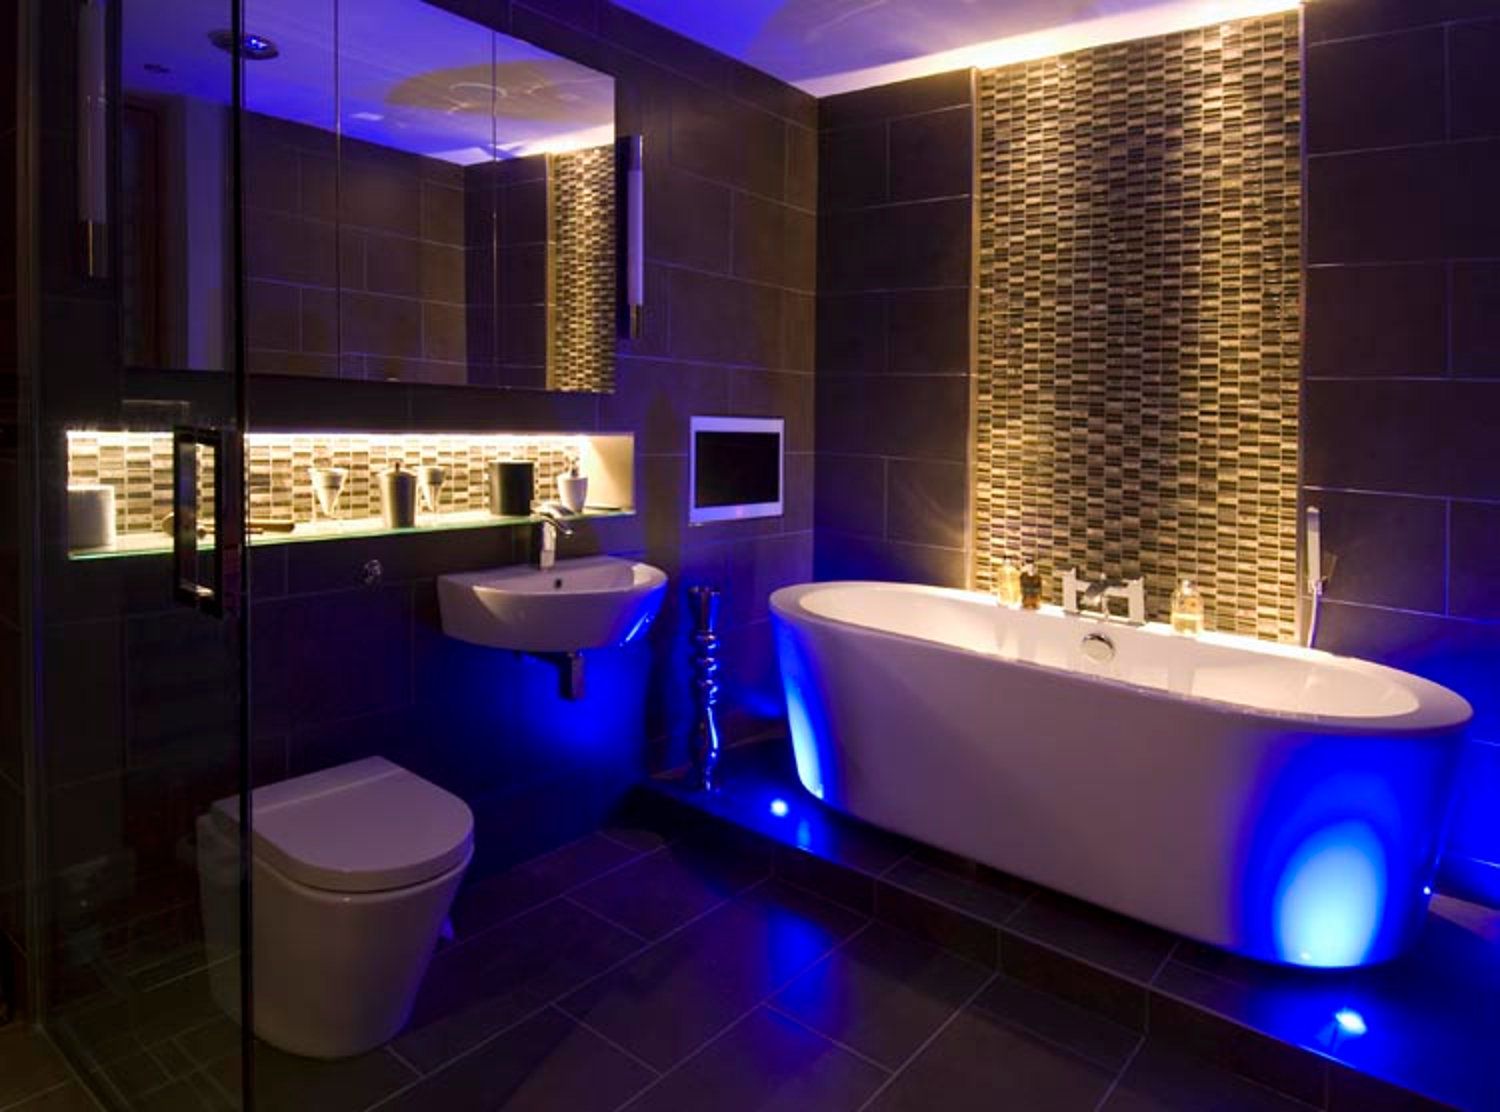 Bathroom simulating natural lighting with artificial bulbs and lamps